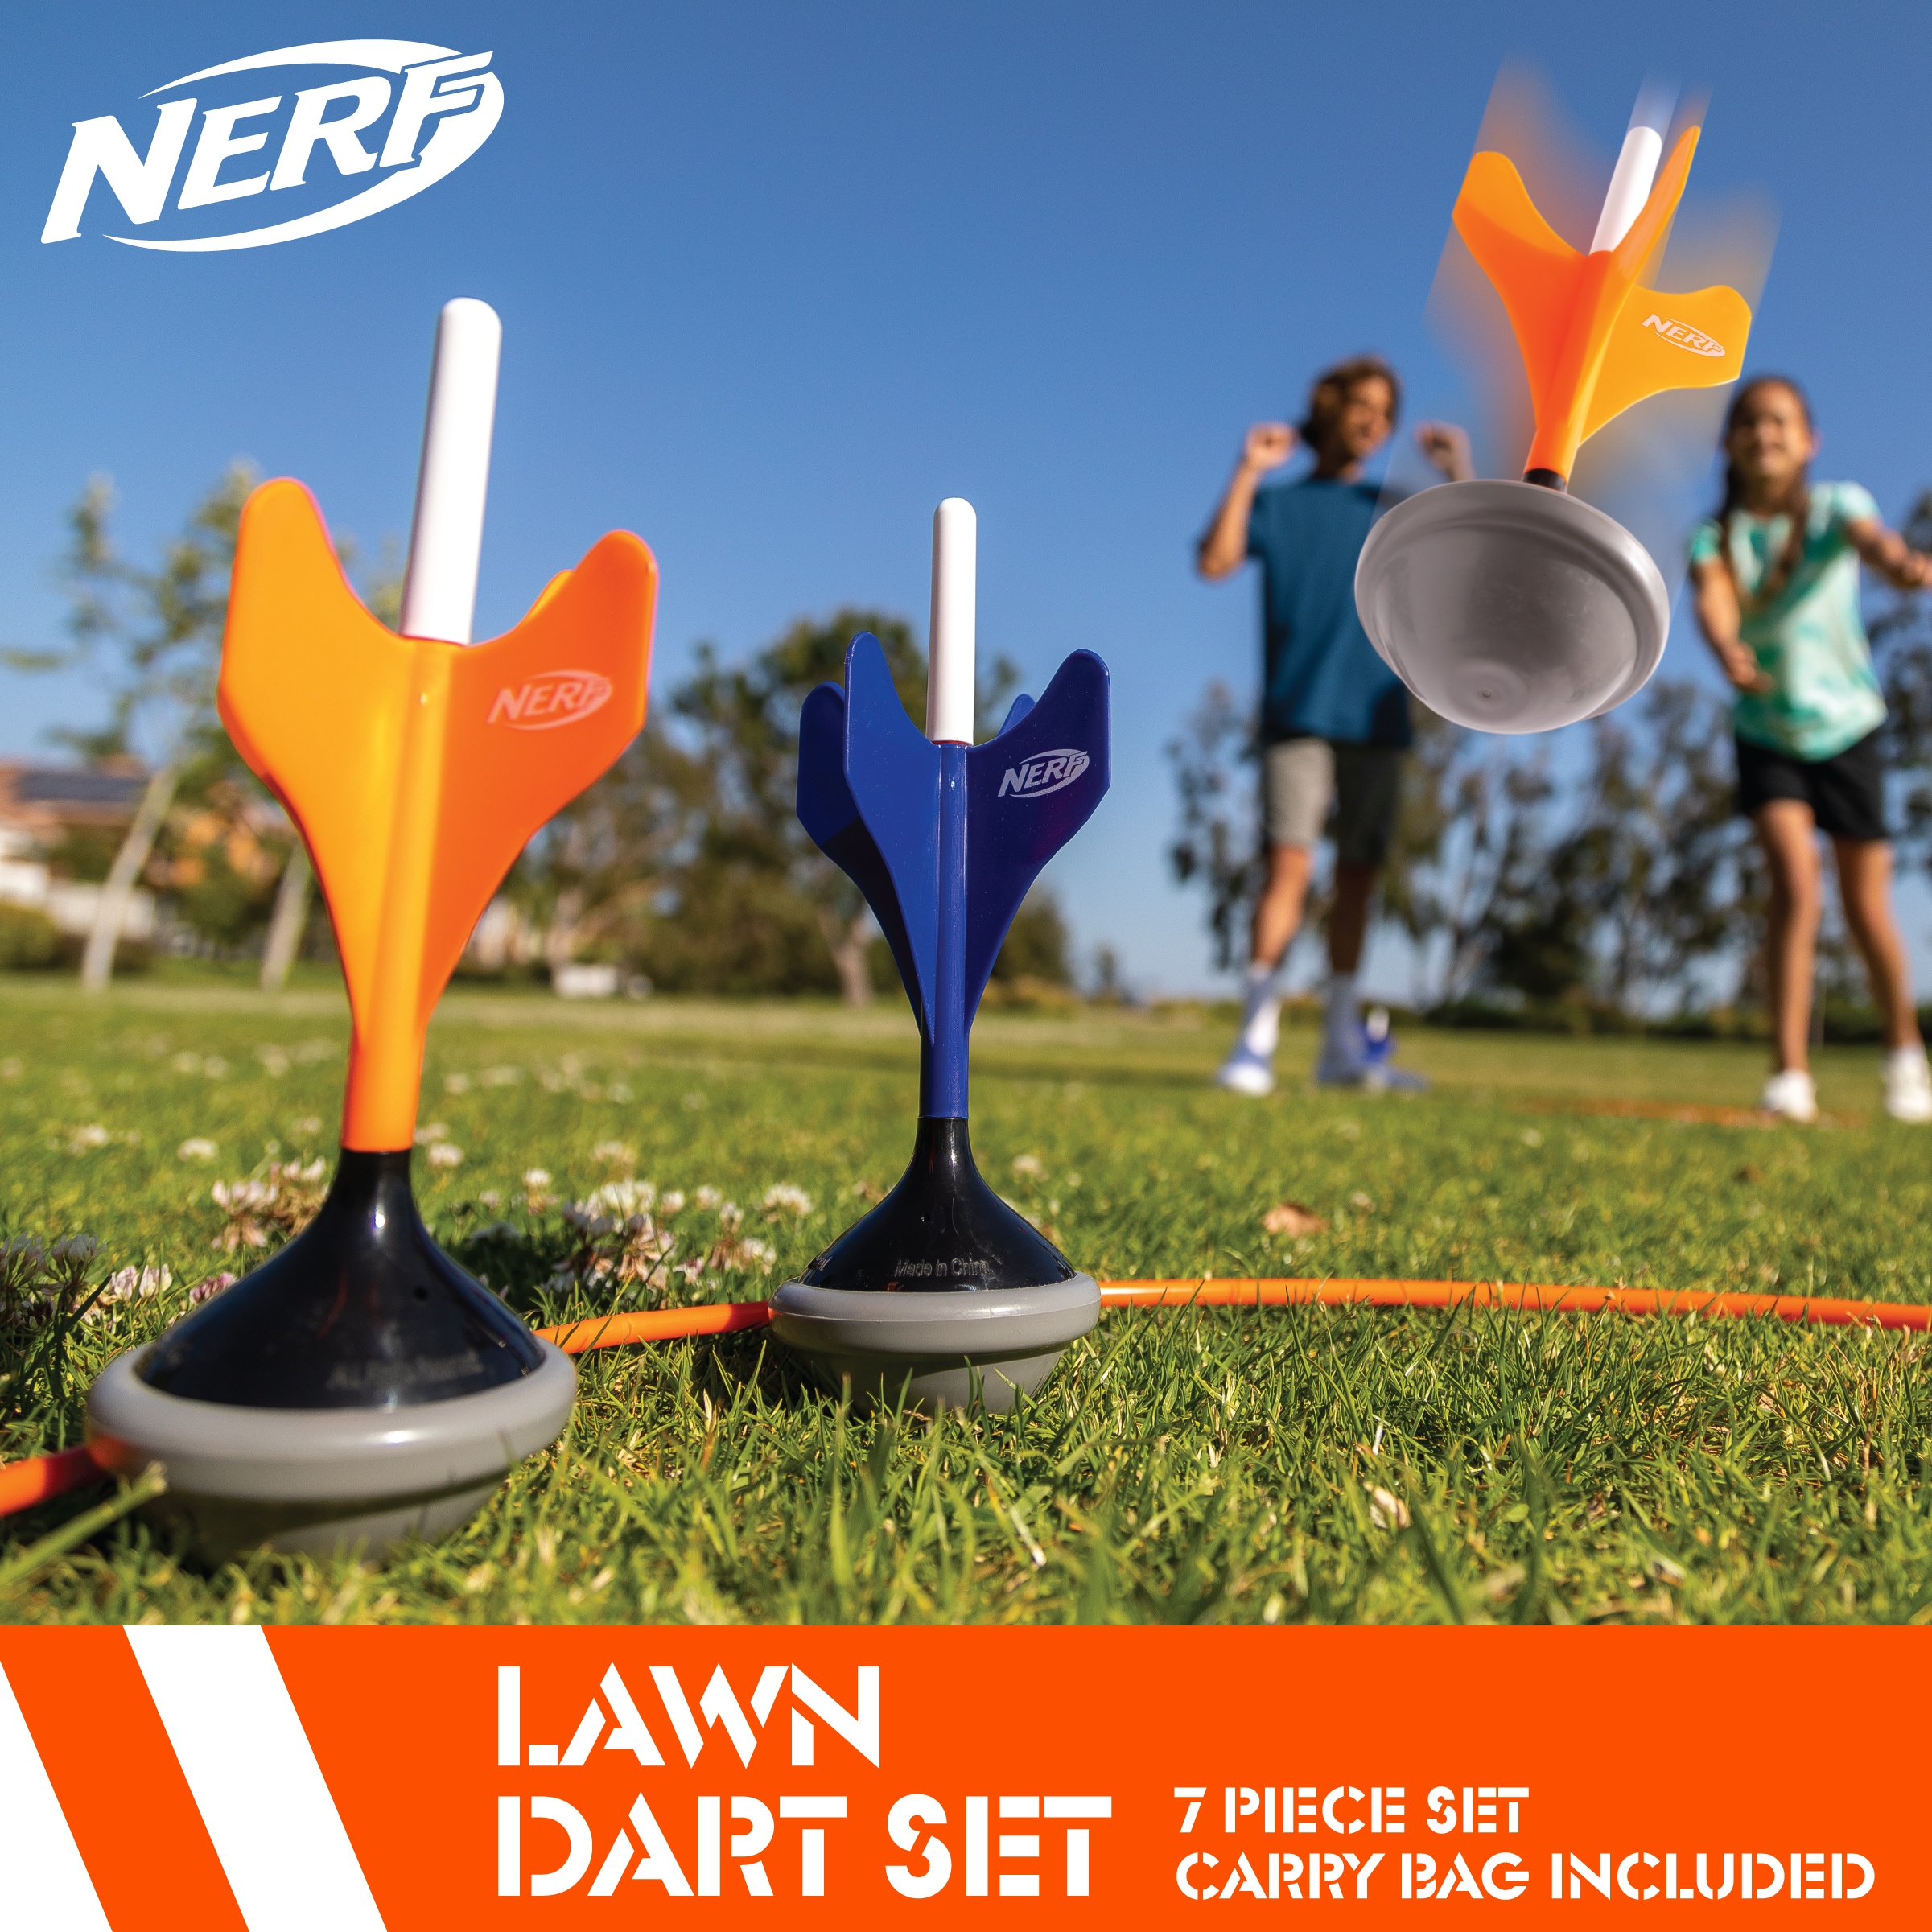 konsol maling ristet brød Nerf Outdoor Yard Darts in the Party Games department at Lowes.com